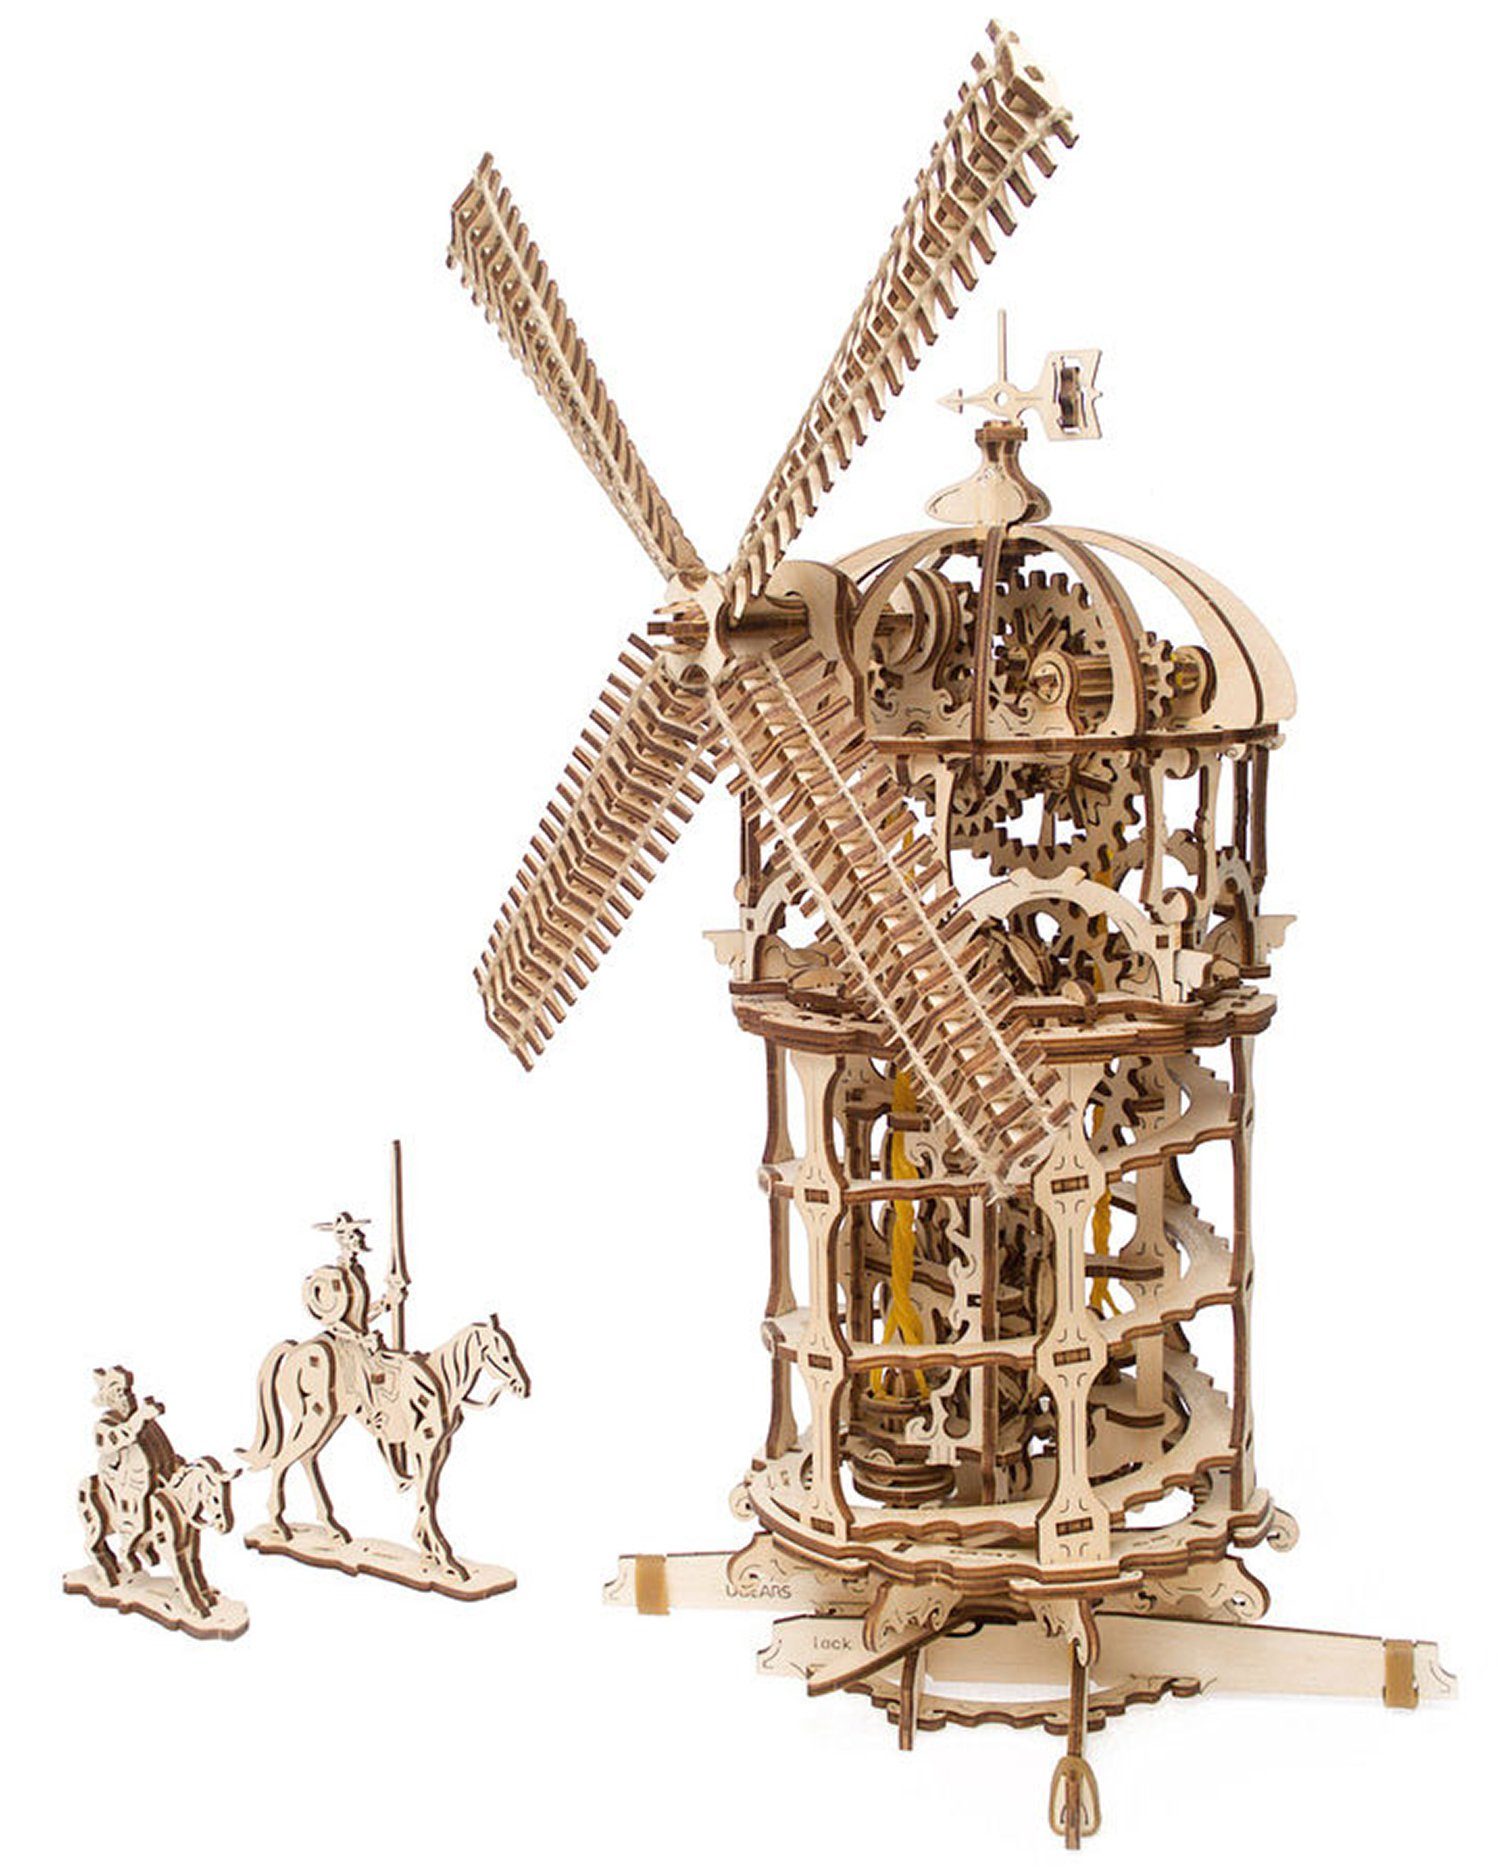 WINDMÜHLE Windmill, Puzzleteile UGEARS Modellbausatz 3D-Puzzle UGEARS 585 Holz - 3D-Puzzle Tower